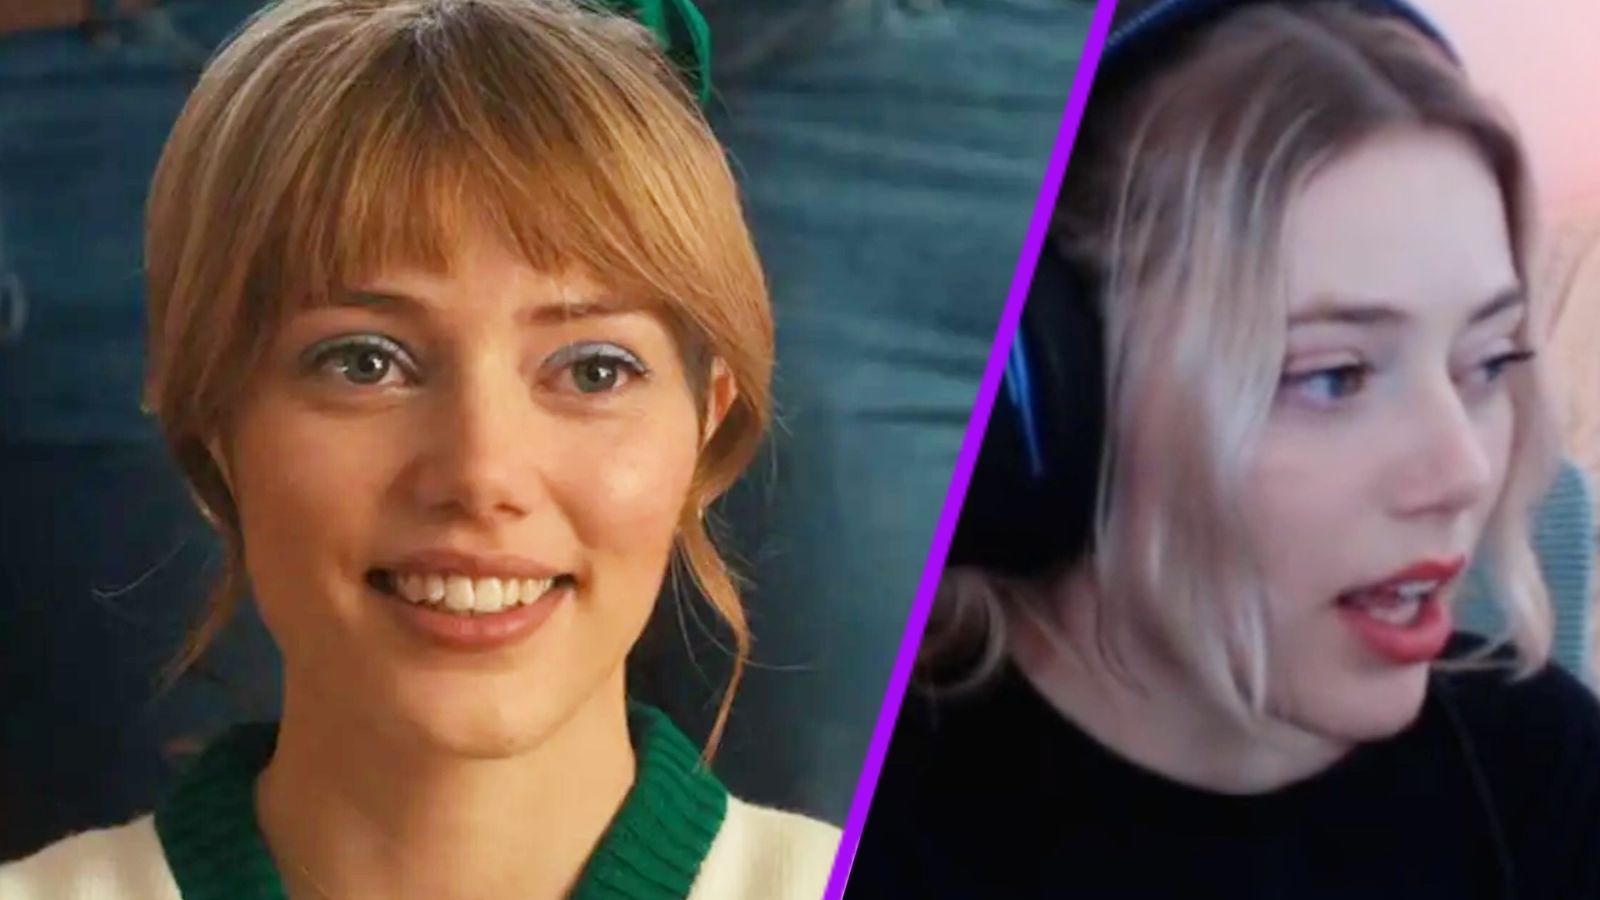 Stranger Things’ Chrissy actress quits acting for Twitch after producers asked for sexual favours 